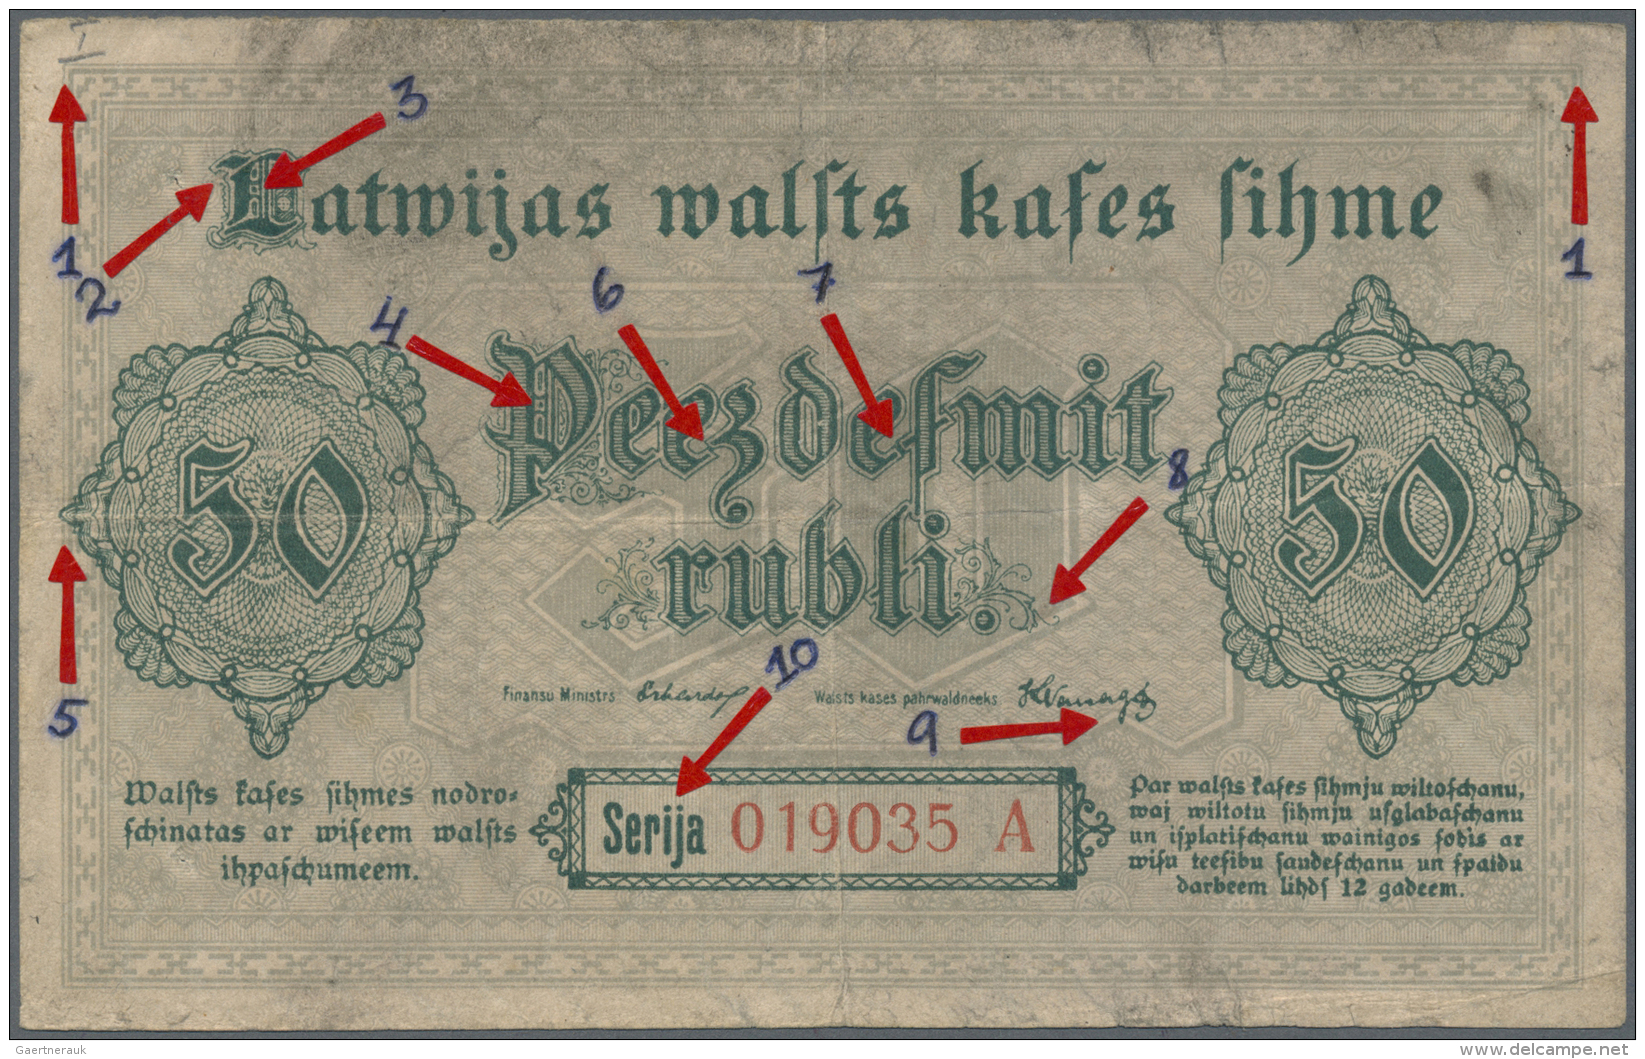 Latvia /Lettland: Rare Contemporary Forgery Of 50 Rubli 1919, Series A, P. 6(f), Ex A. Rucins Collection. Russians Were - Lettonia